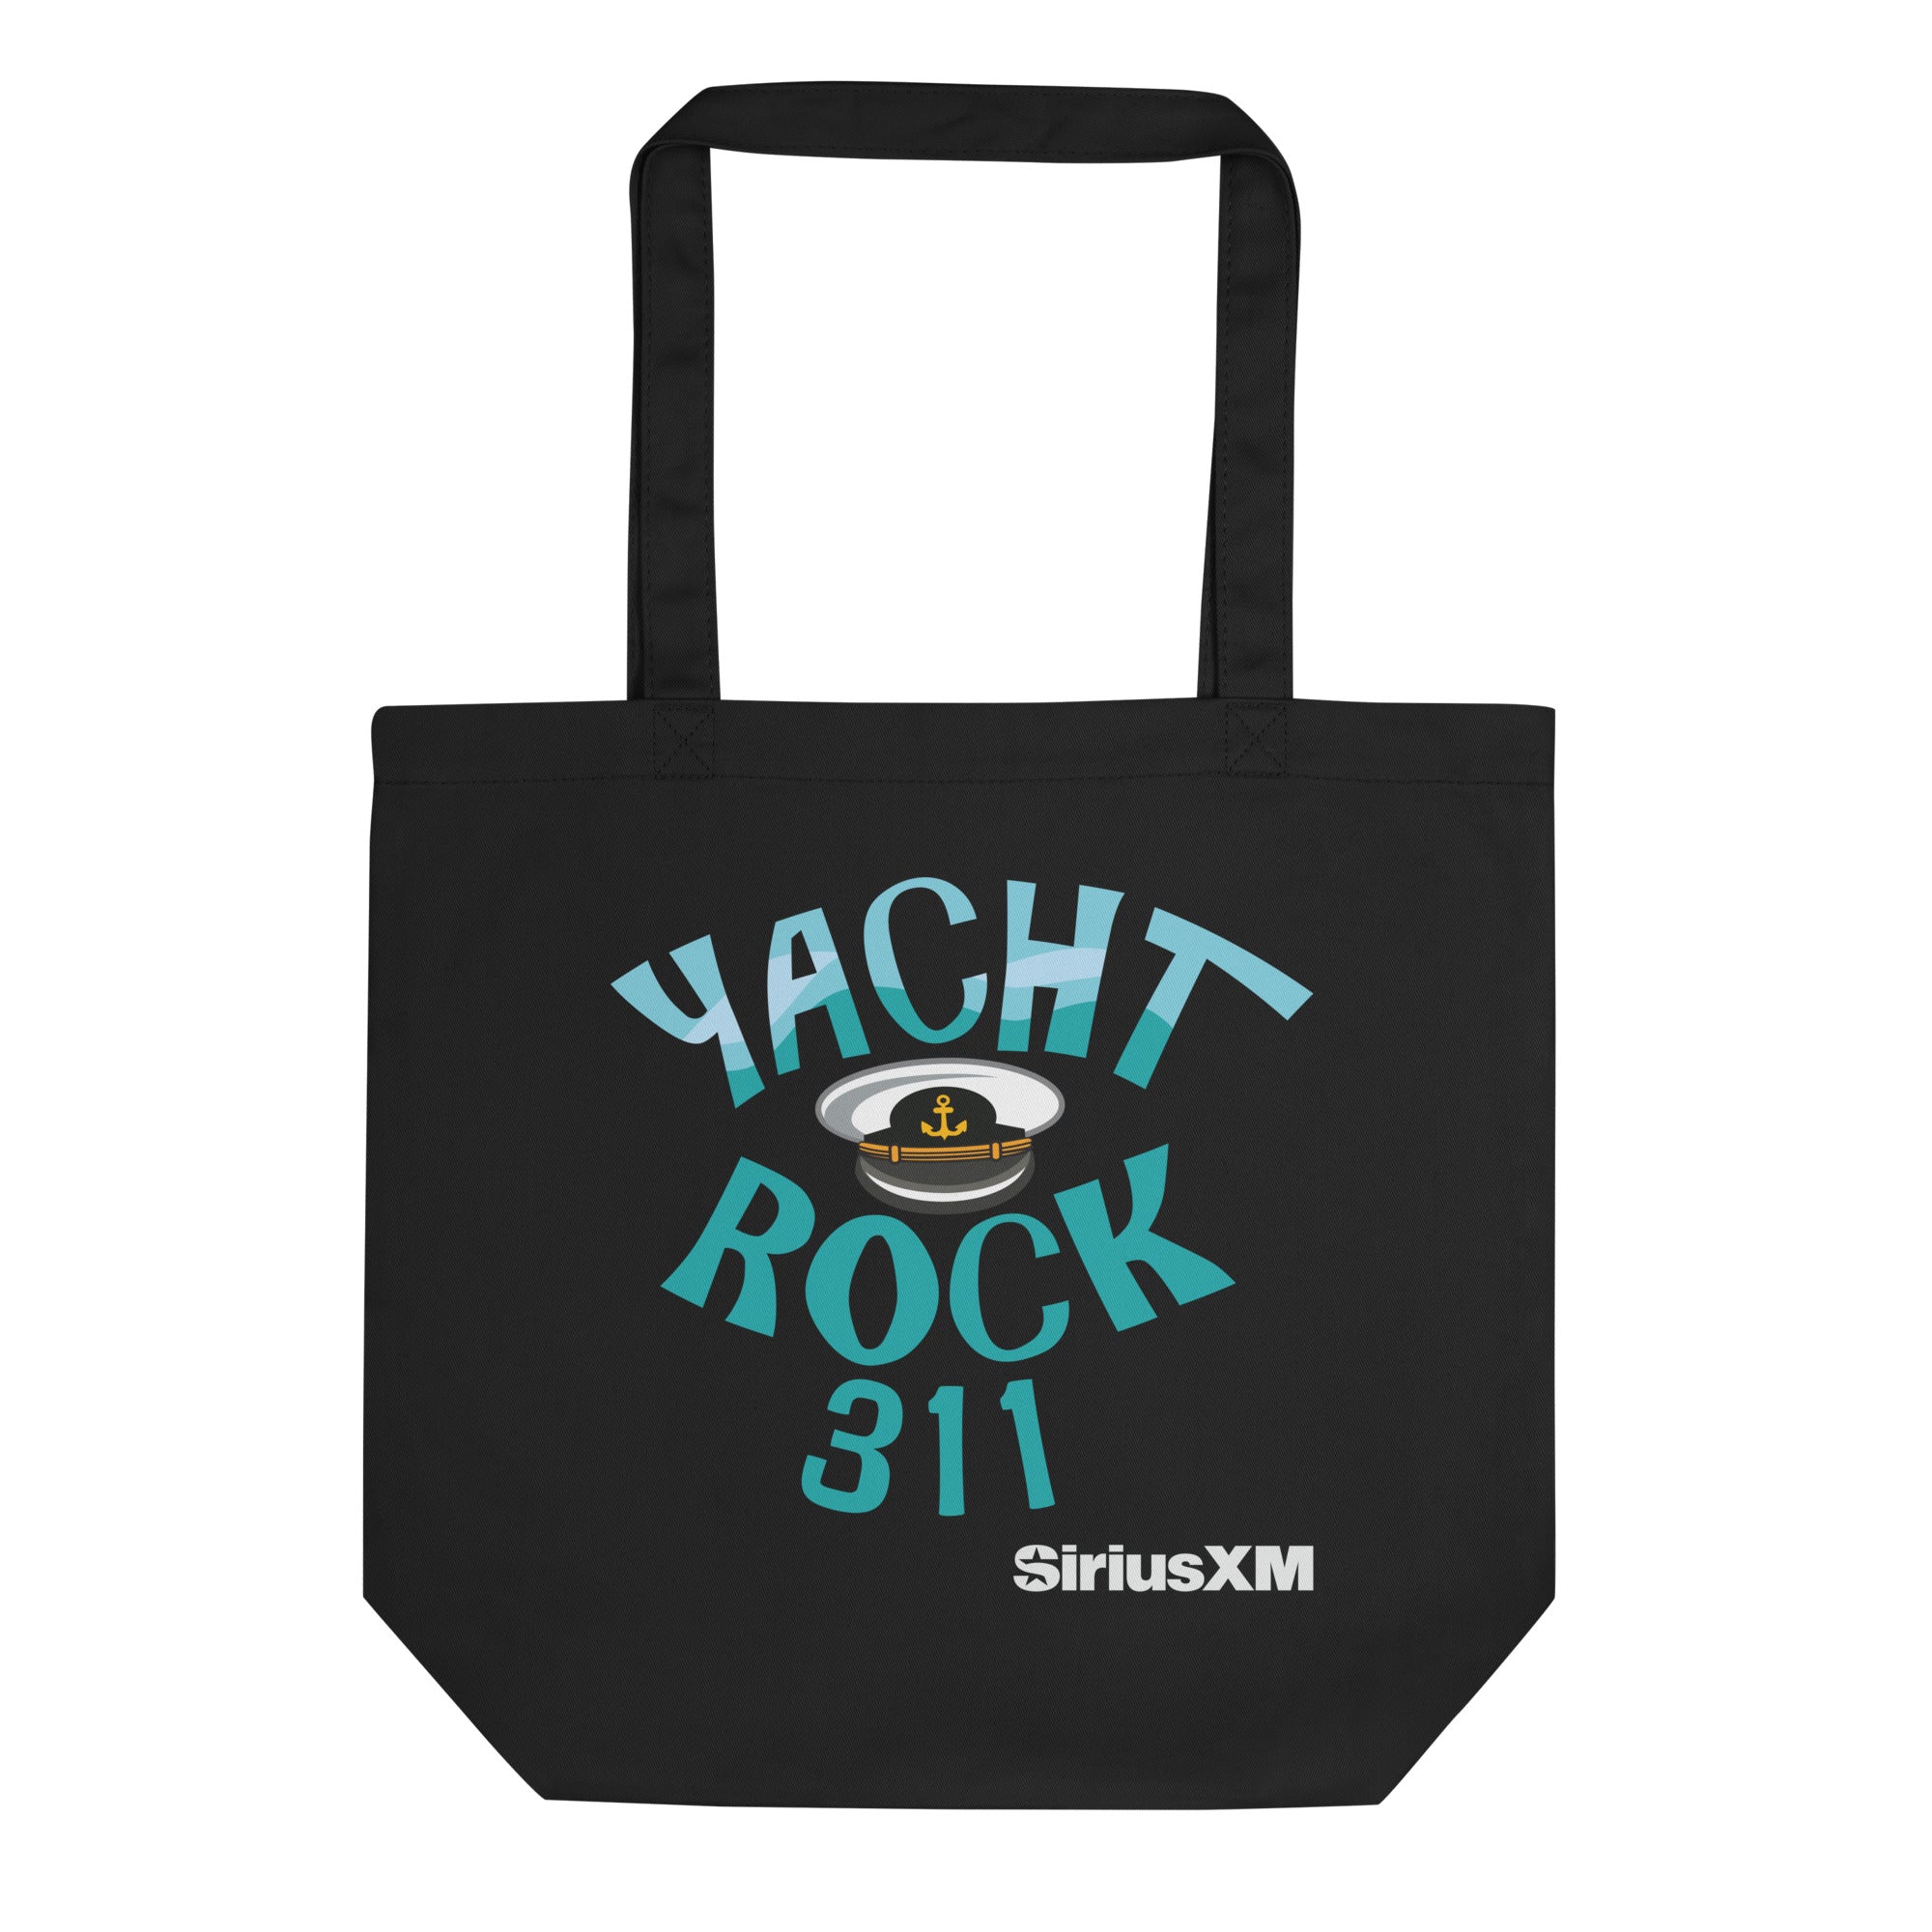 Yacht Rock: Eco Tote